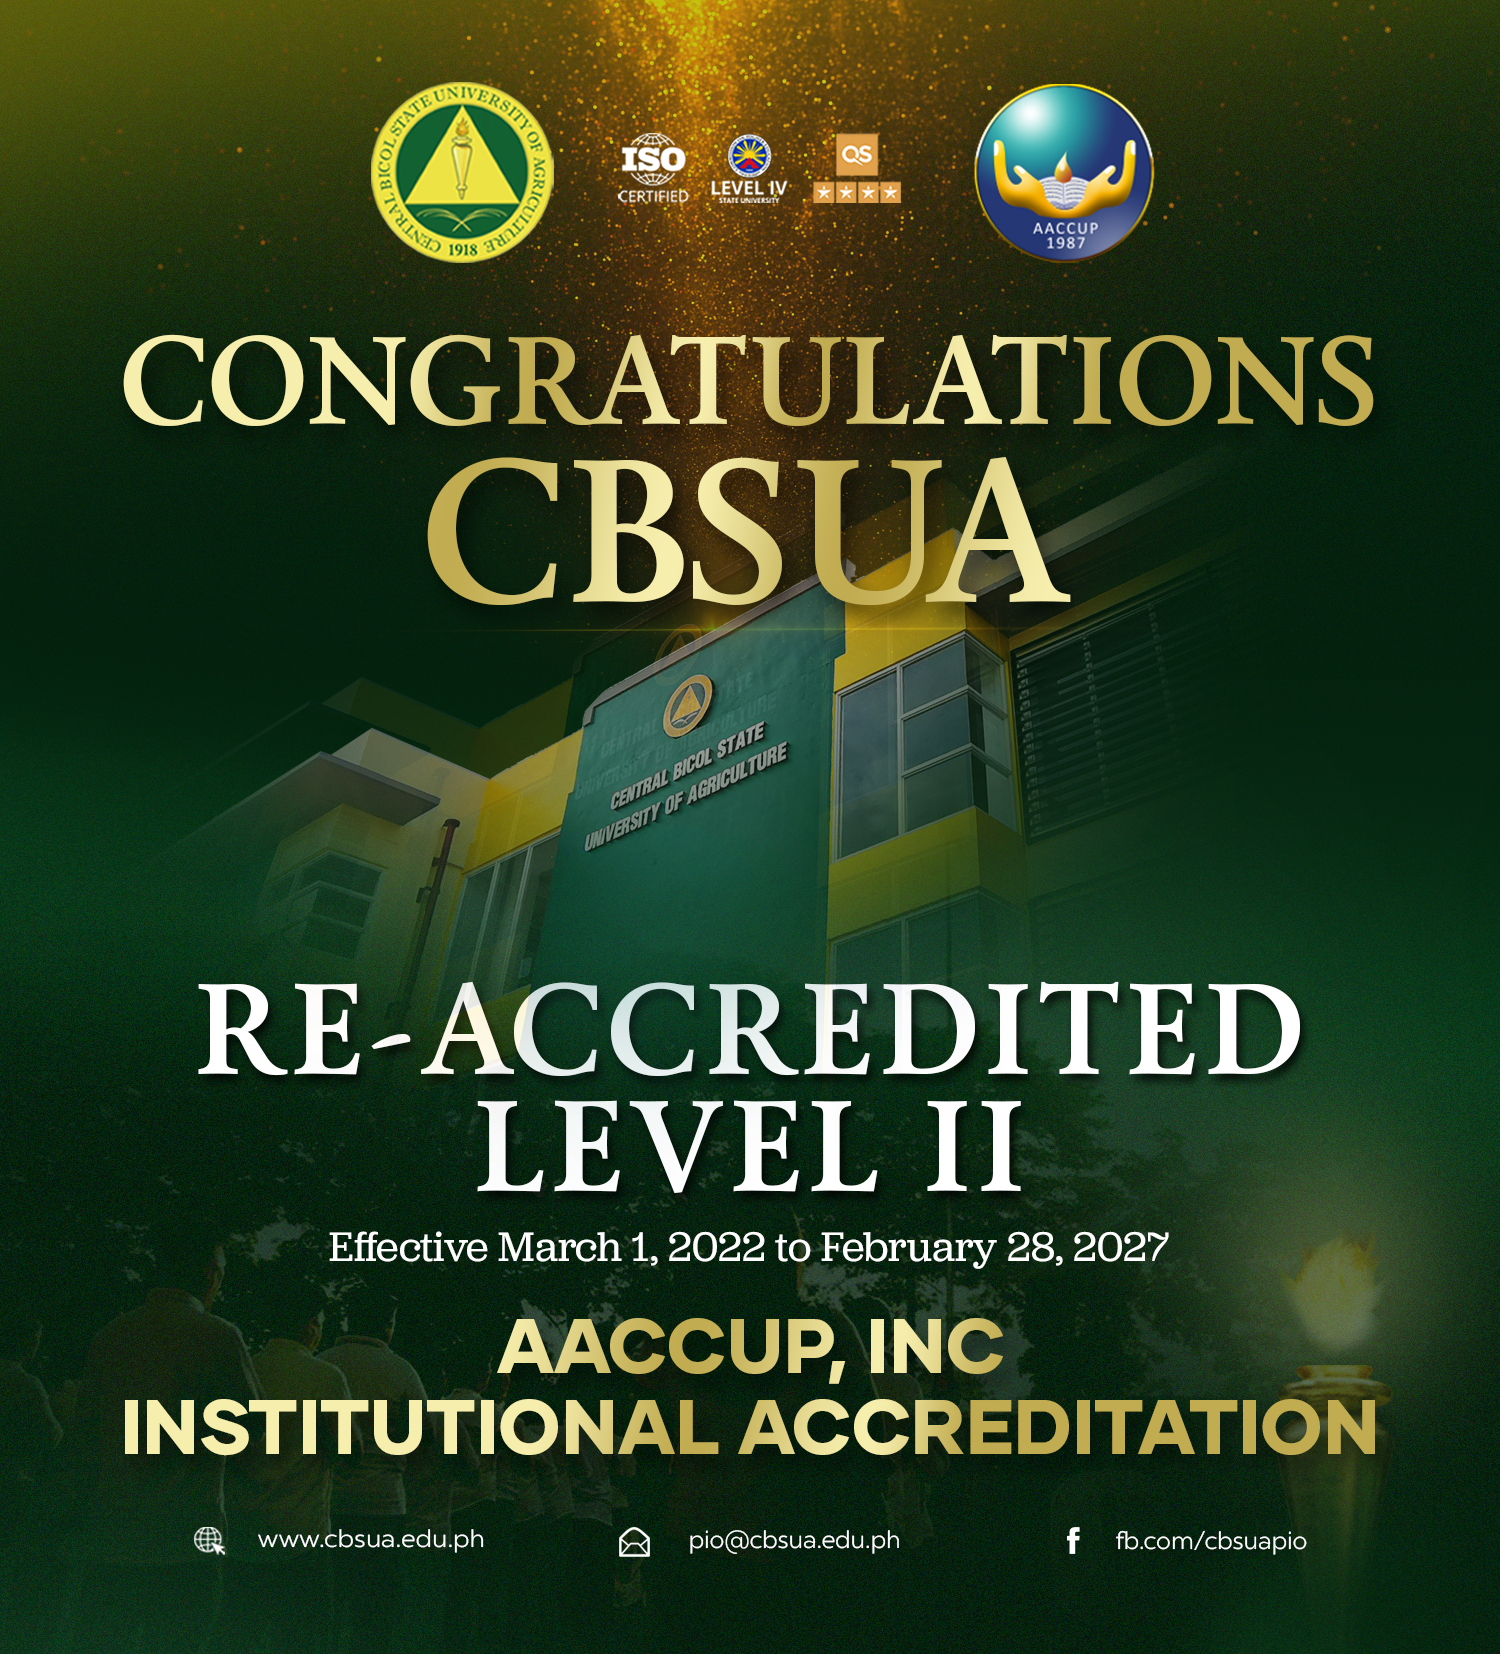 CBSUA RECEIVES RE-ACCREDITED LEVEL II AWARD FROM AACCUP